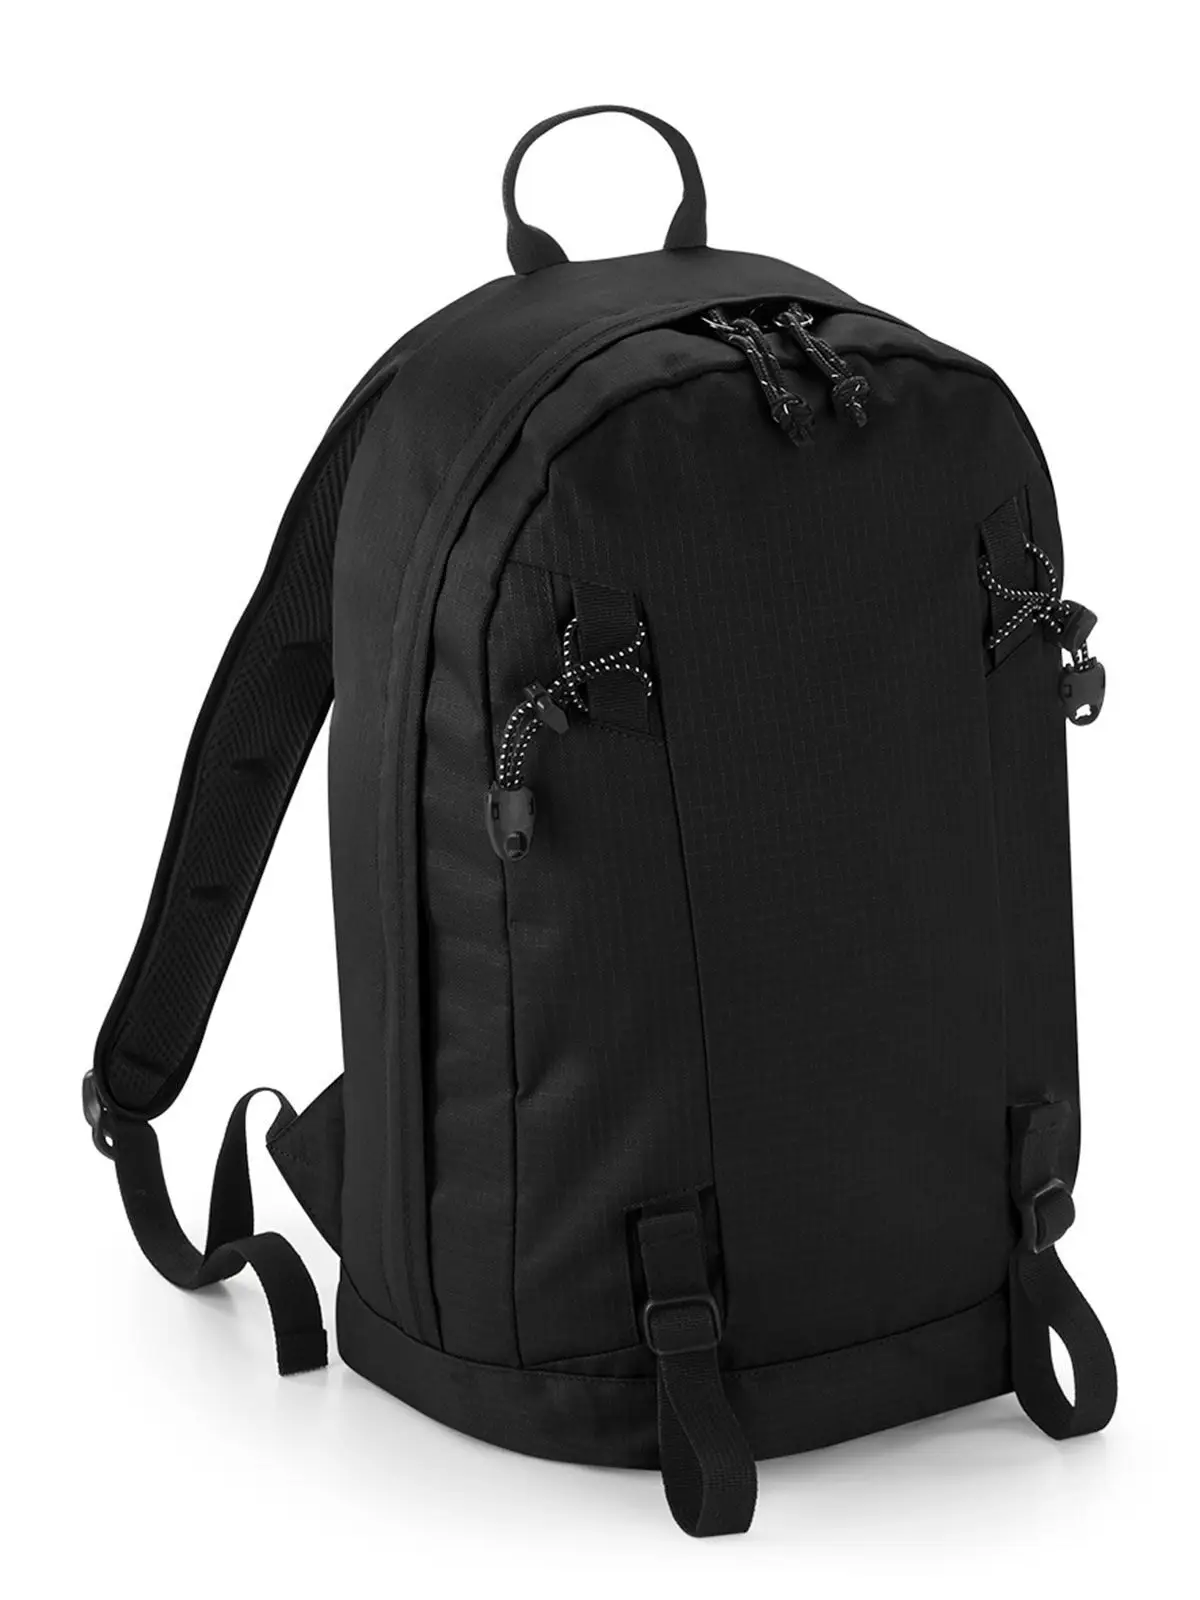 Everyday Outdoor 15L Backpack